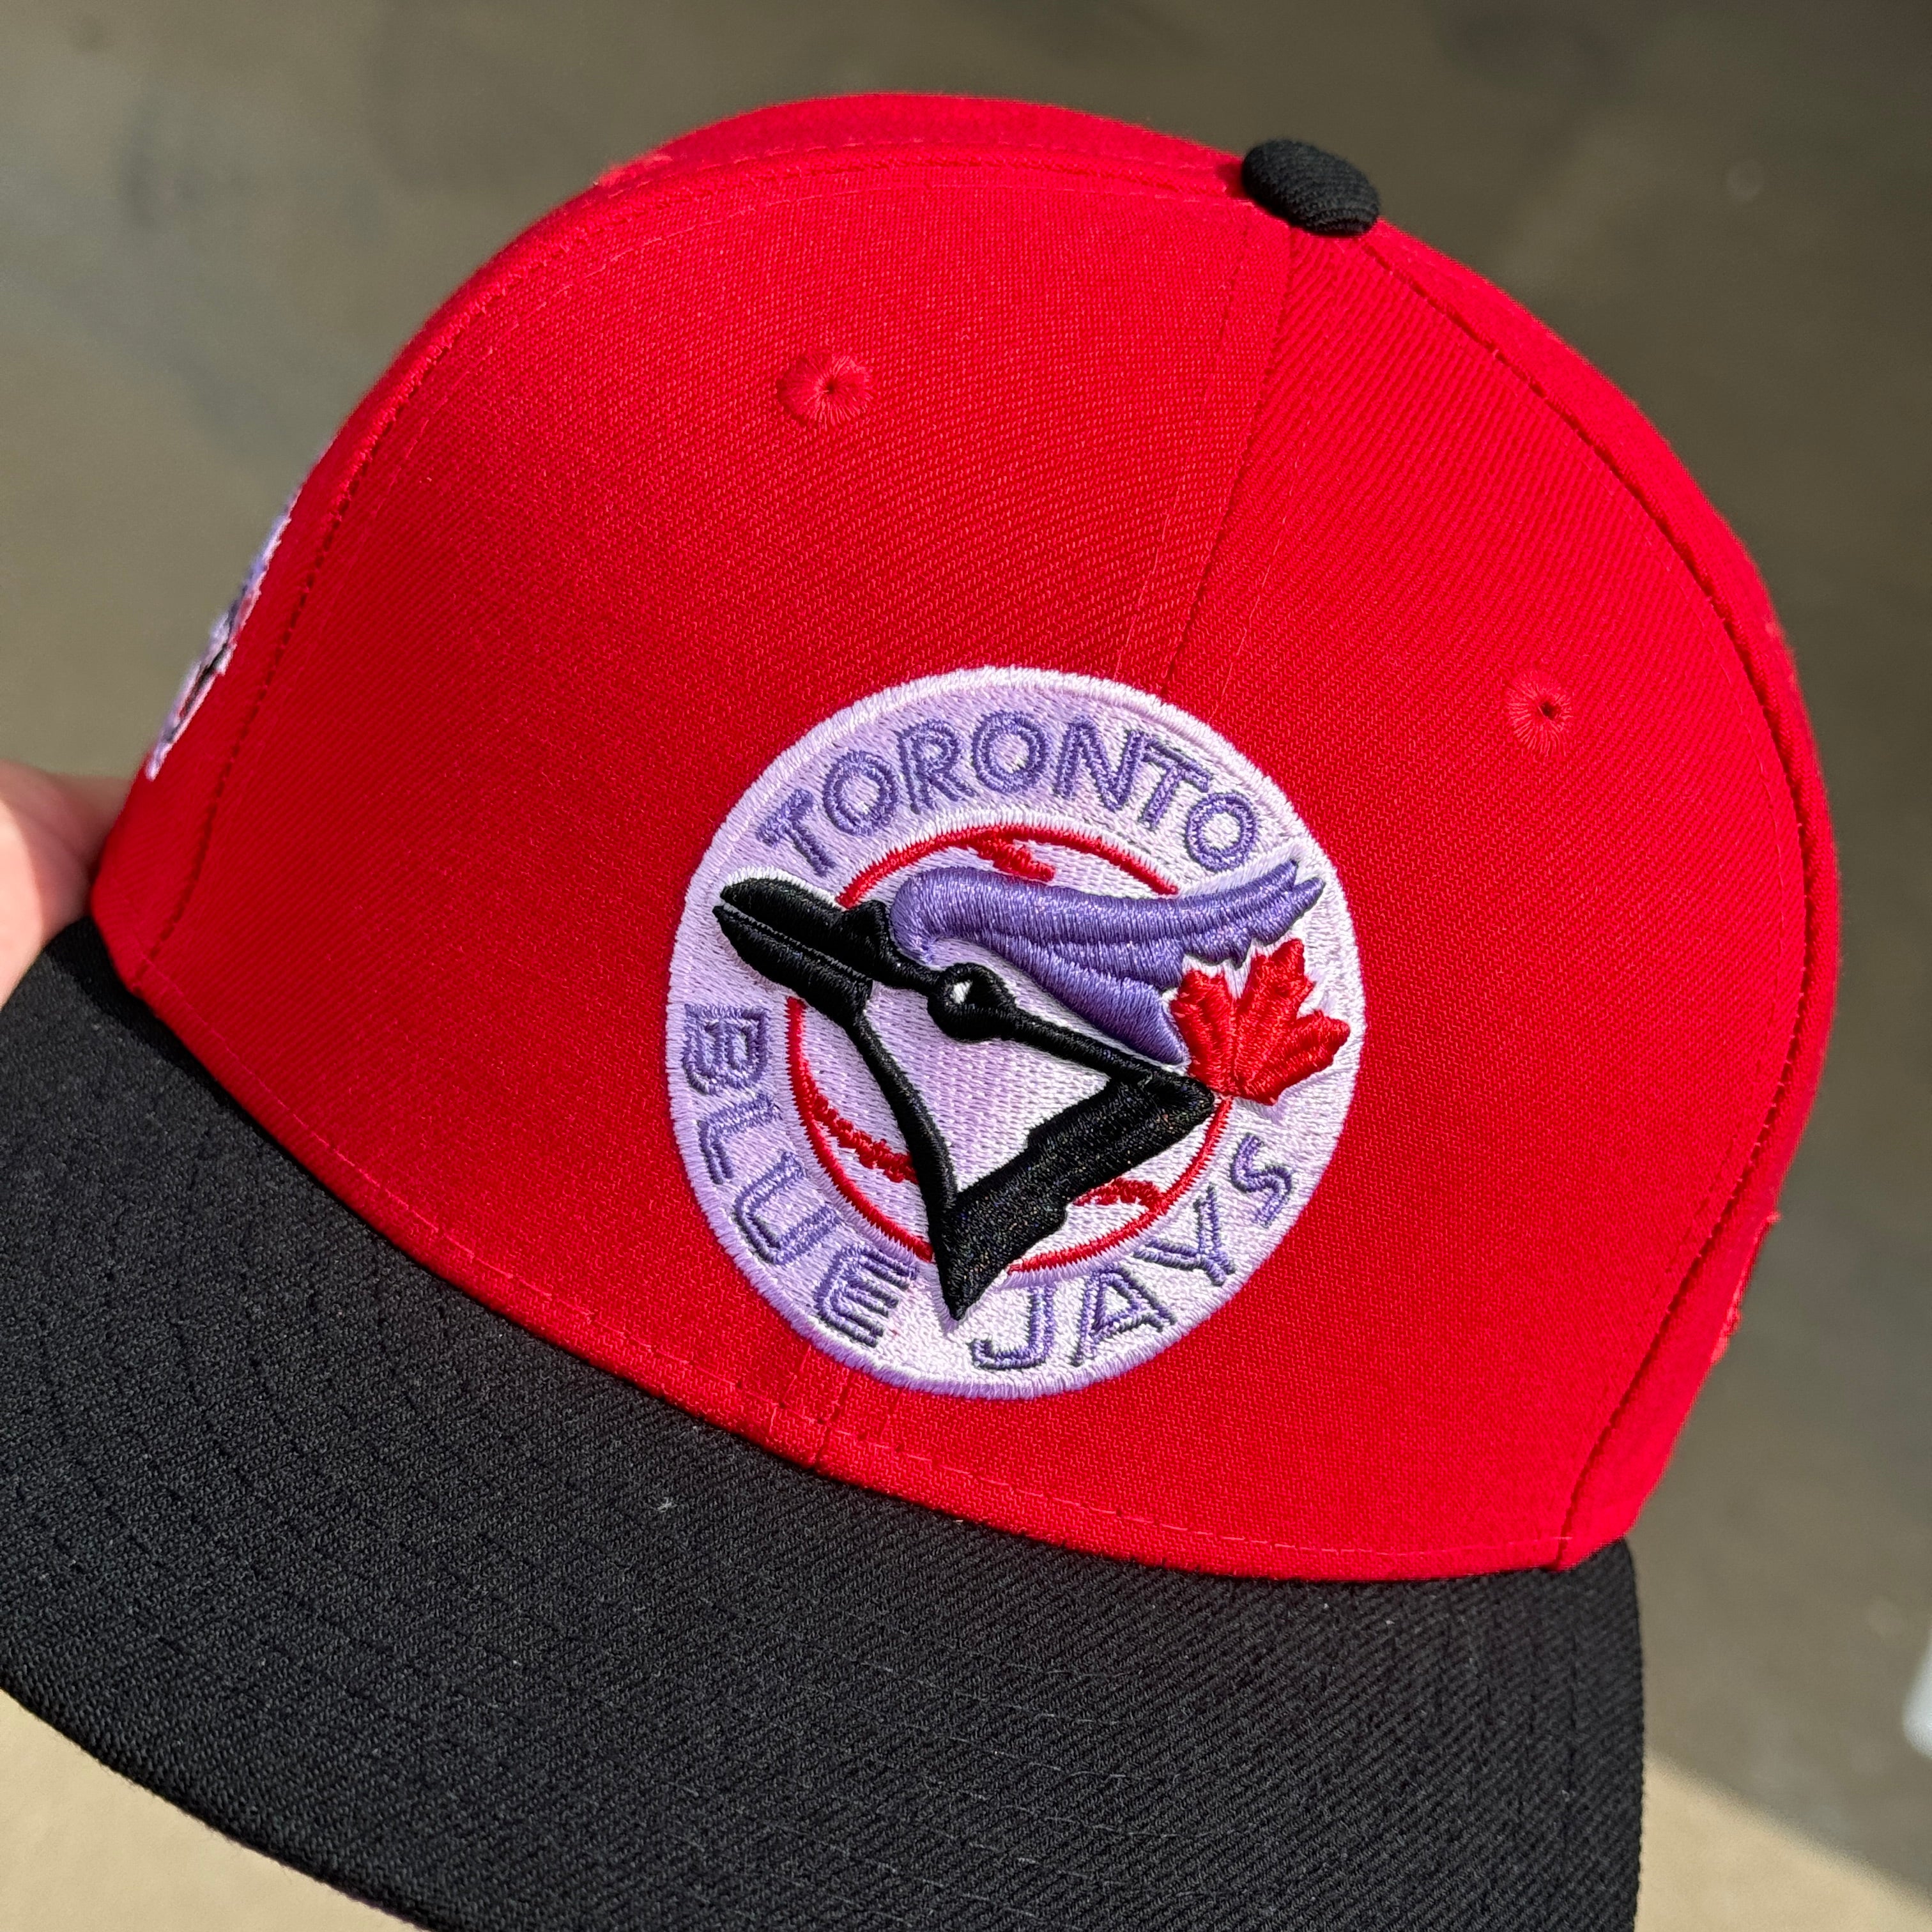 USED 1/8 Red Toronto Blue Jays Montreal 20th Anniversary 59fifty New Era Fitted Hat Cap